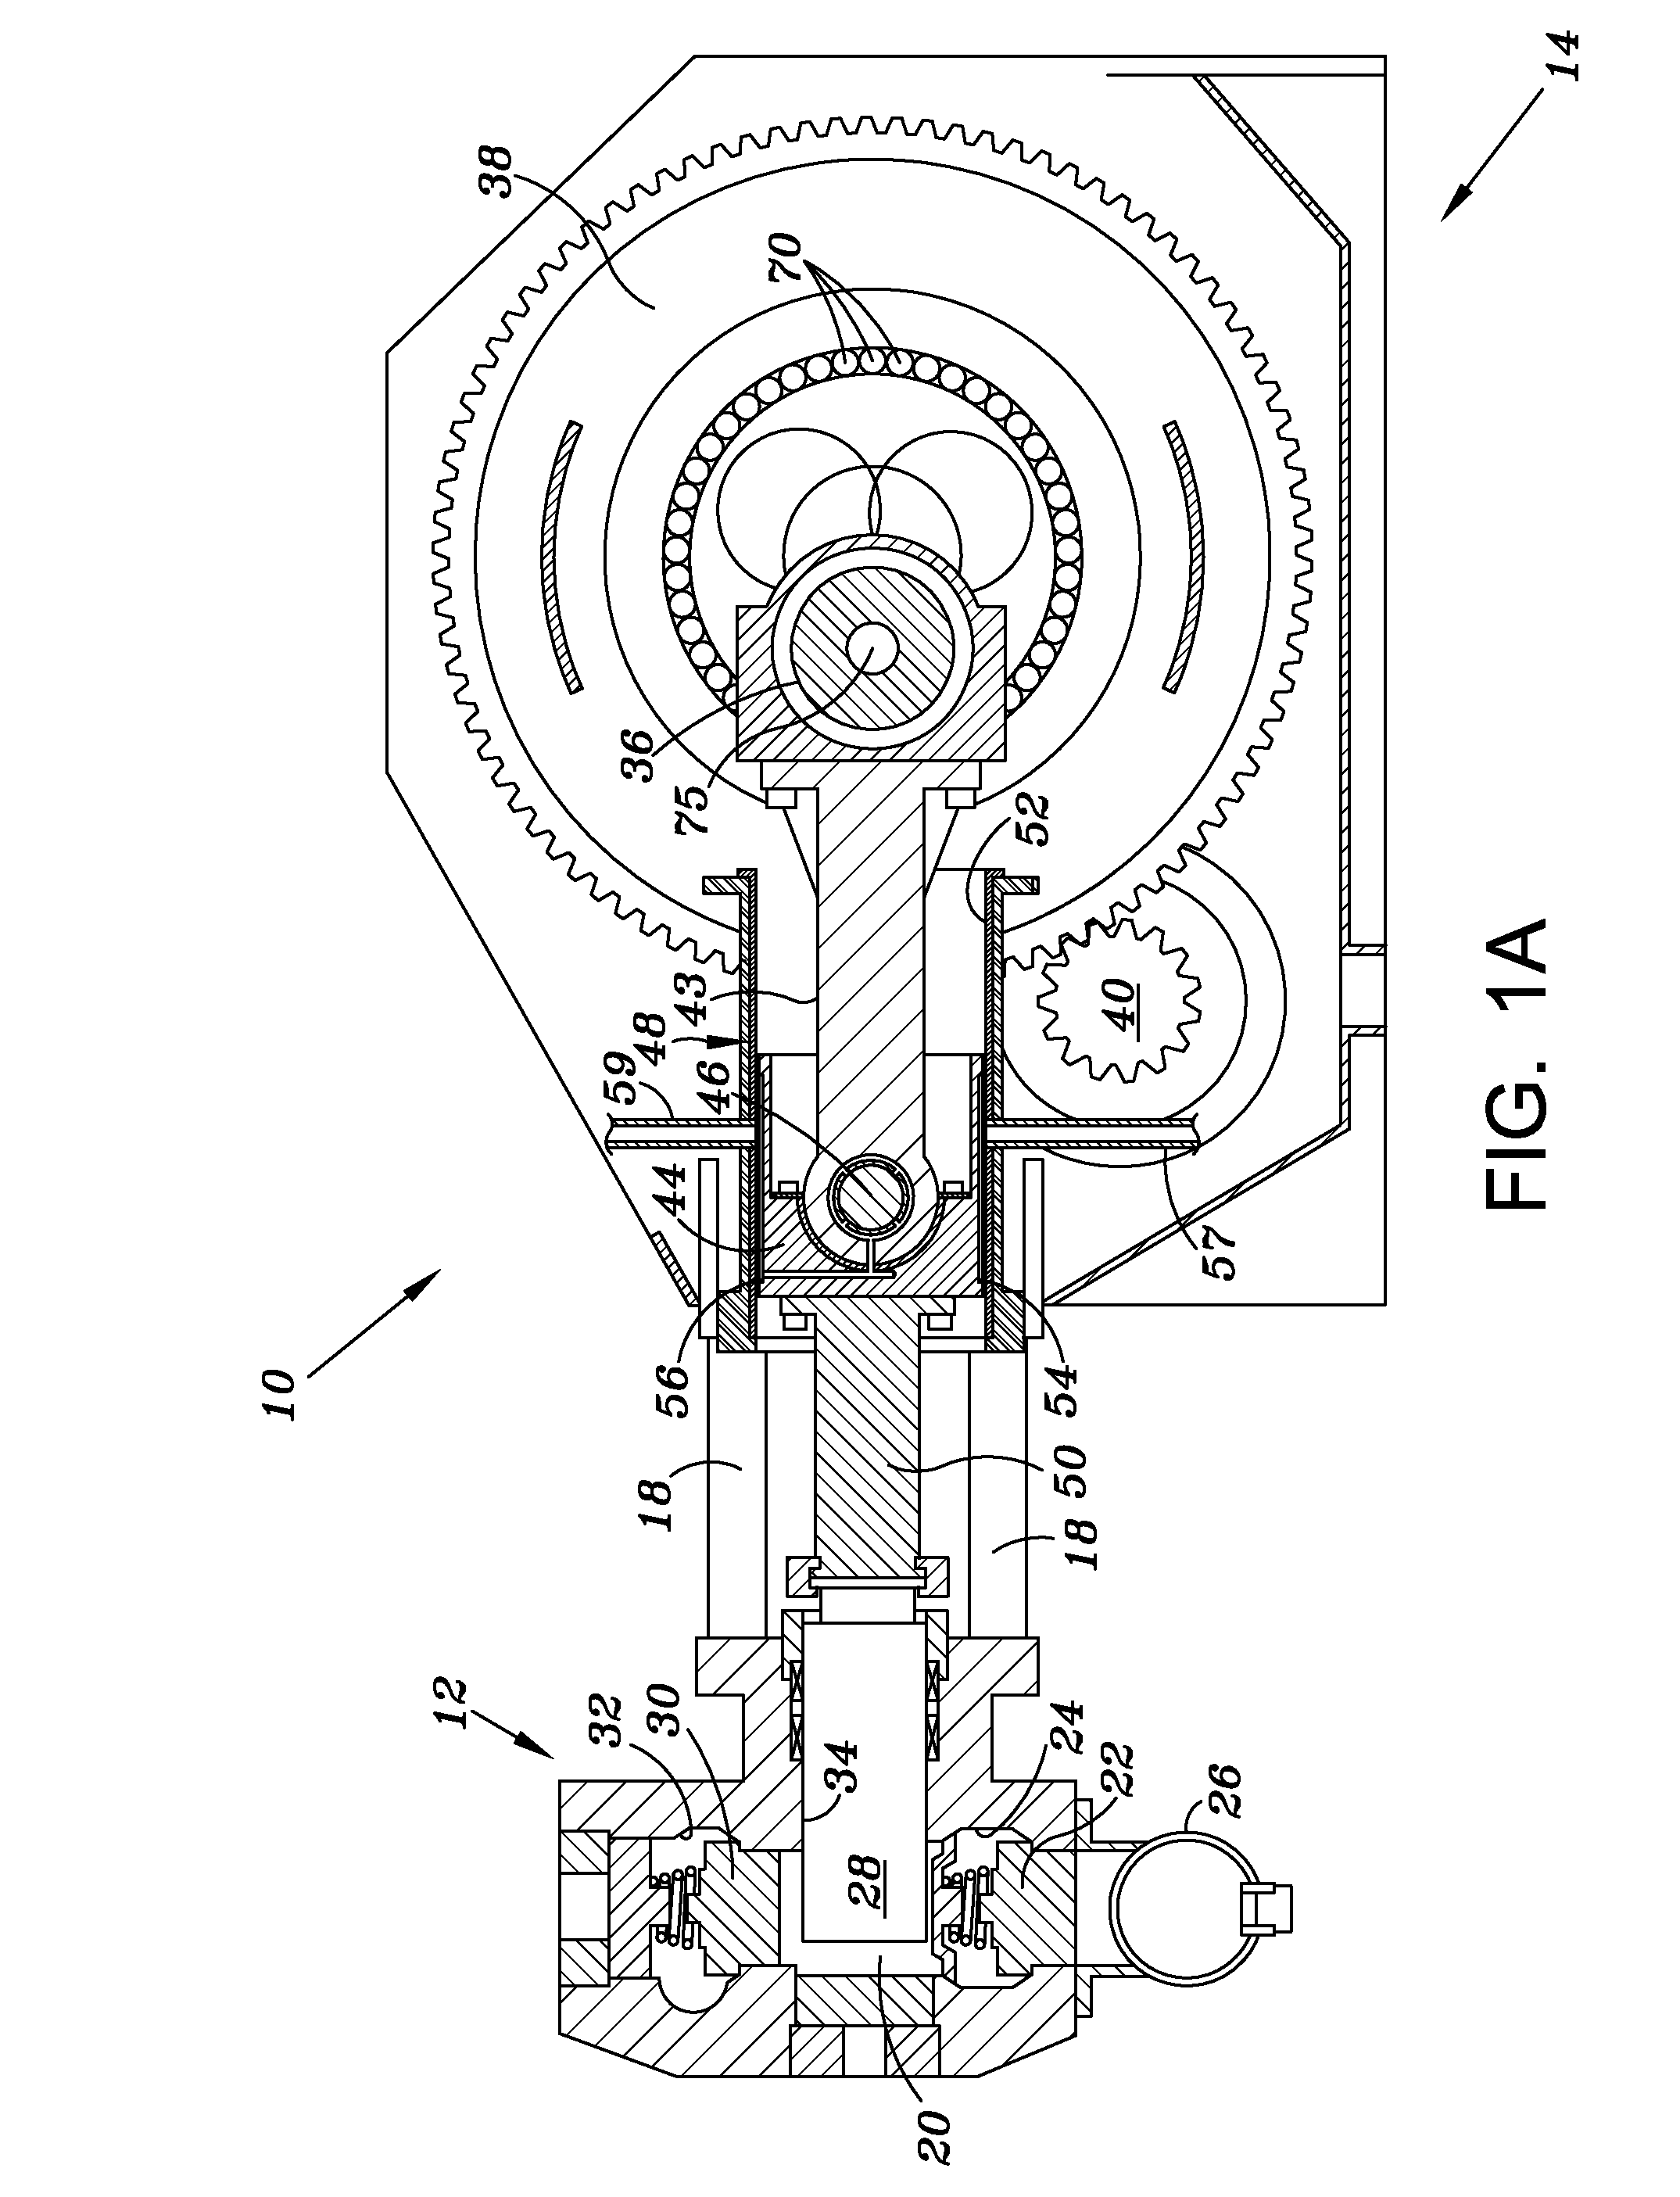 Reciprocating pump with dual circuit power end lubrication system